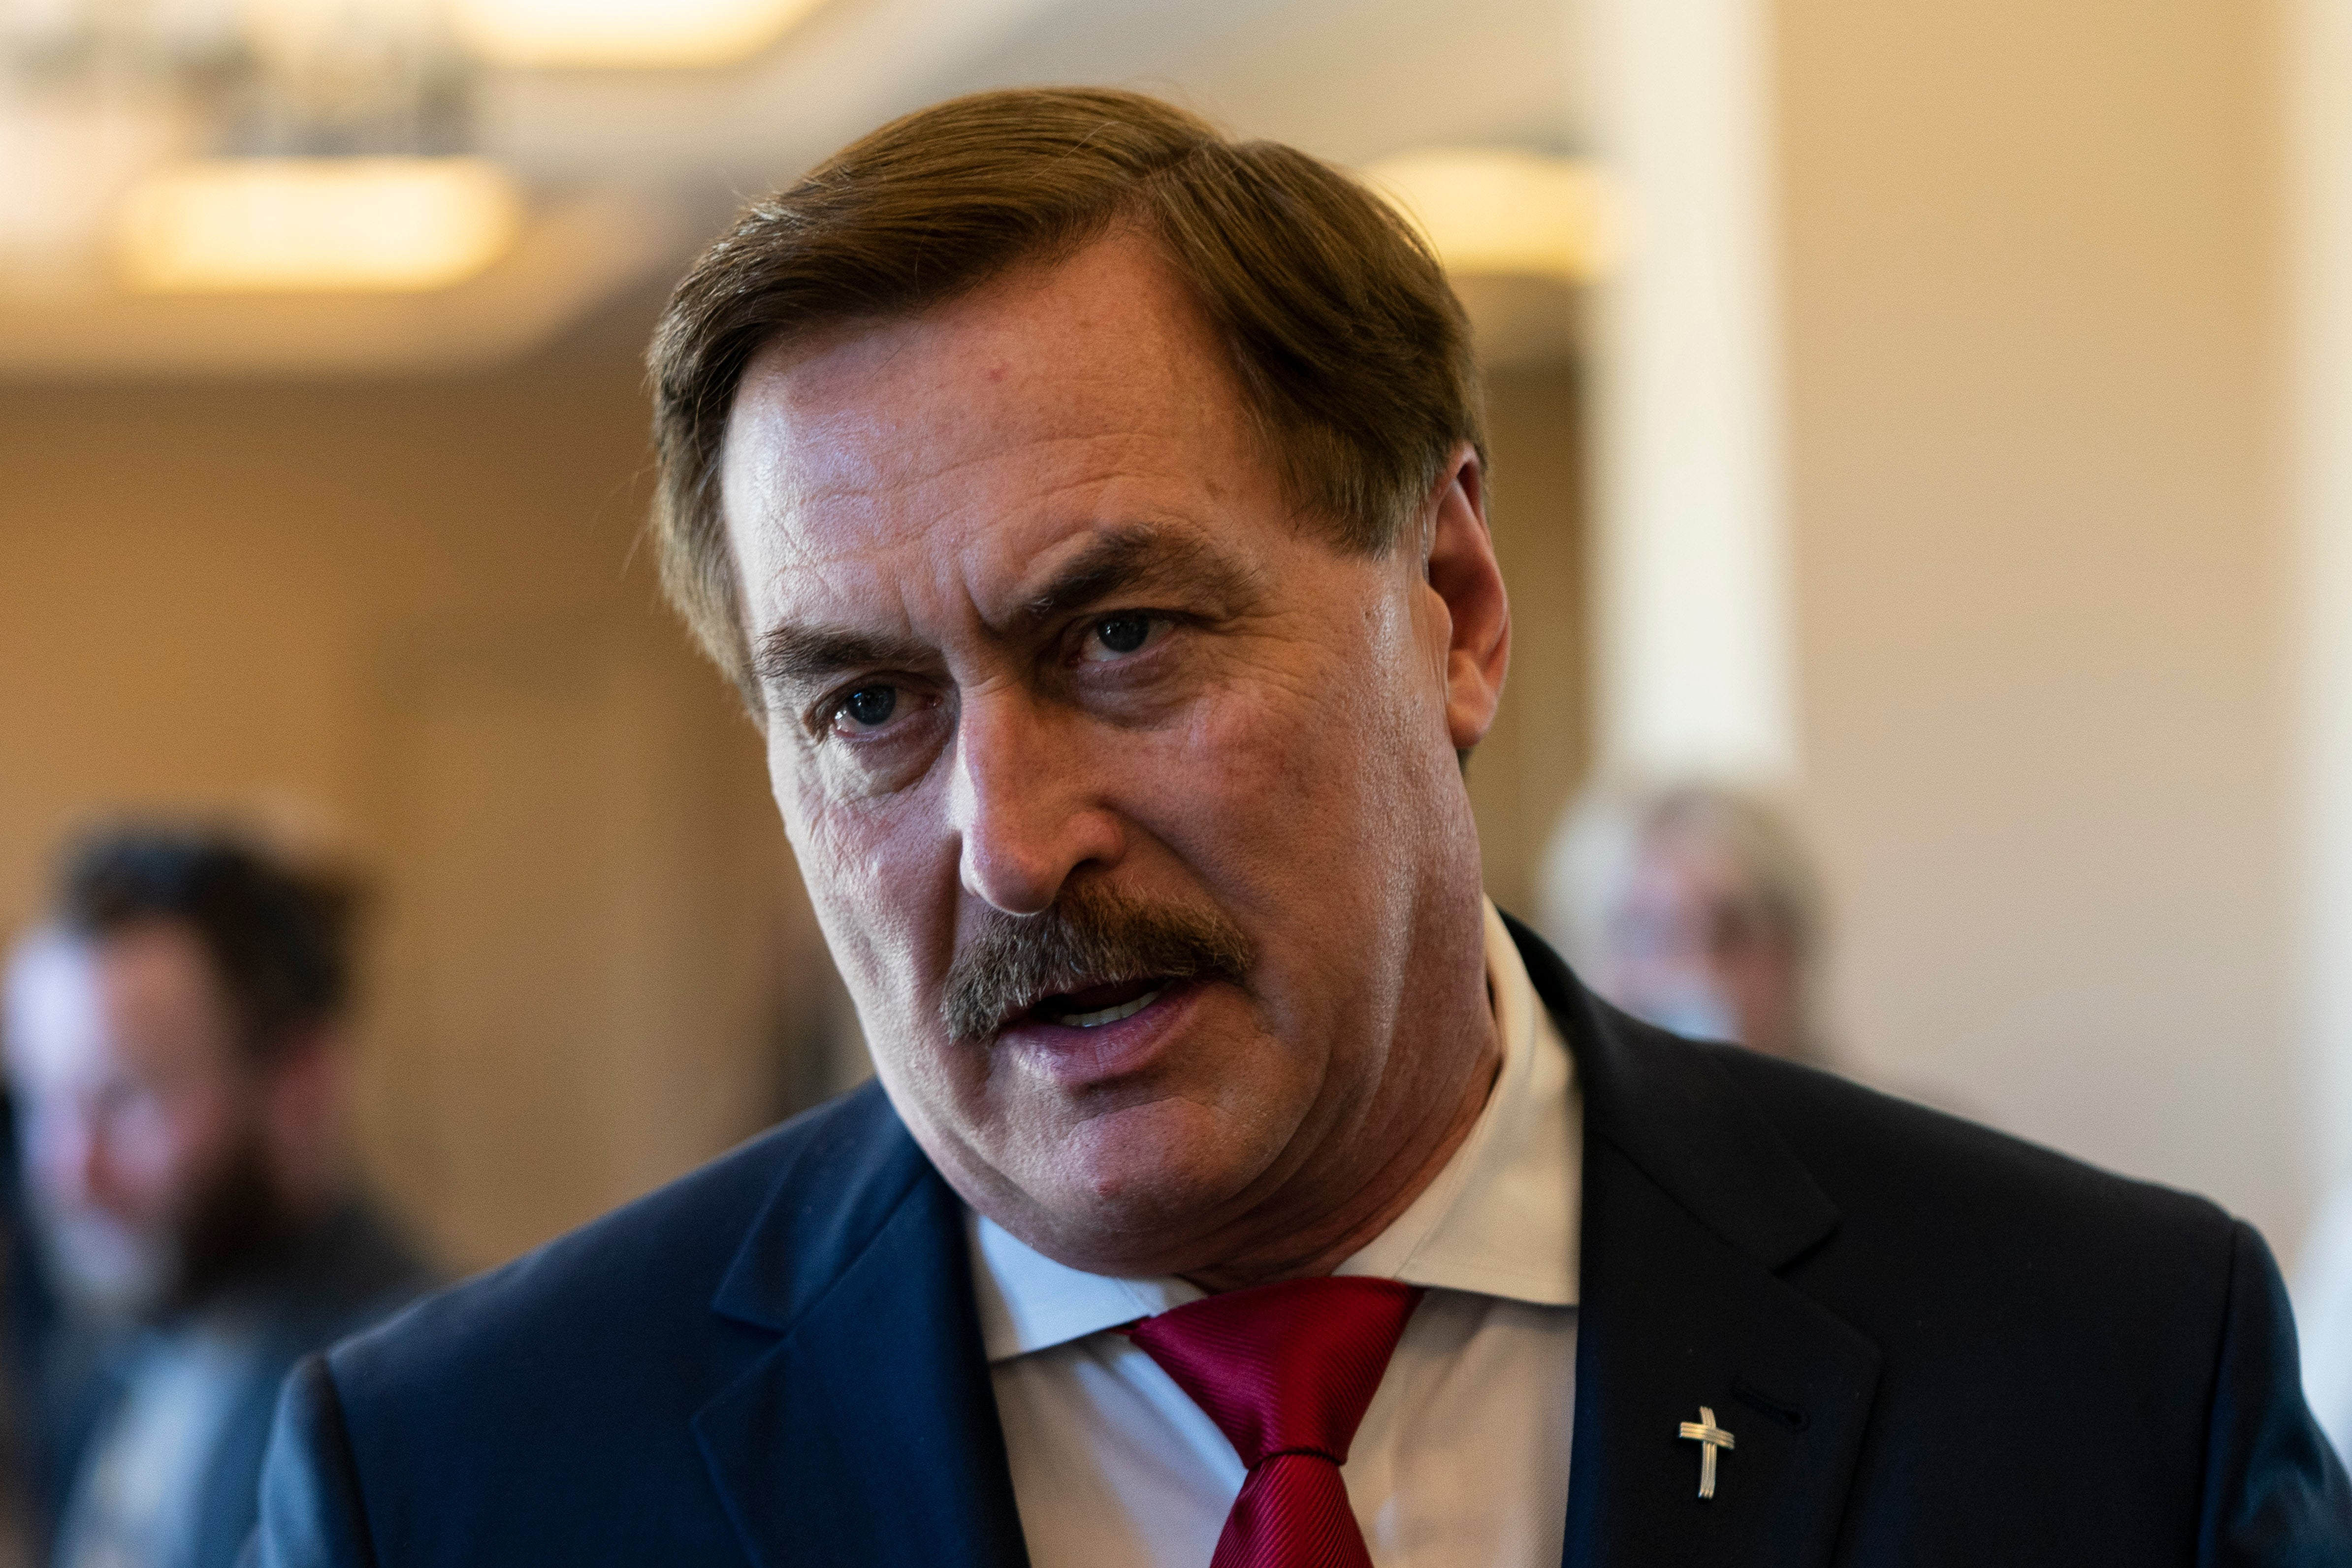 MyPillow CEO Mike Lindell is auctioning off company assets